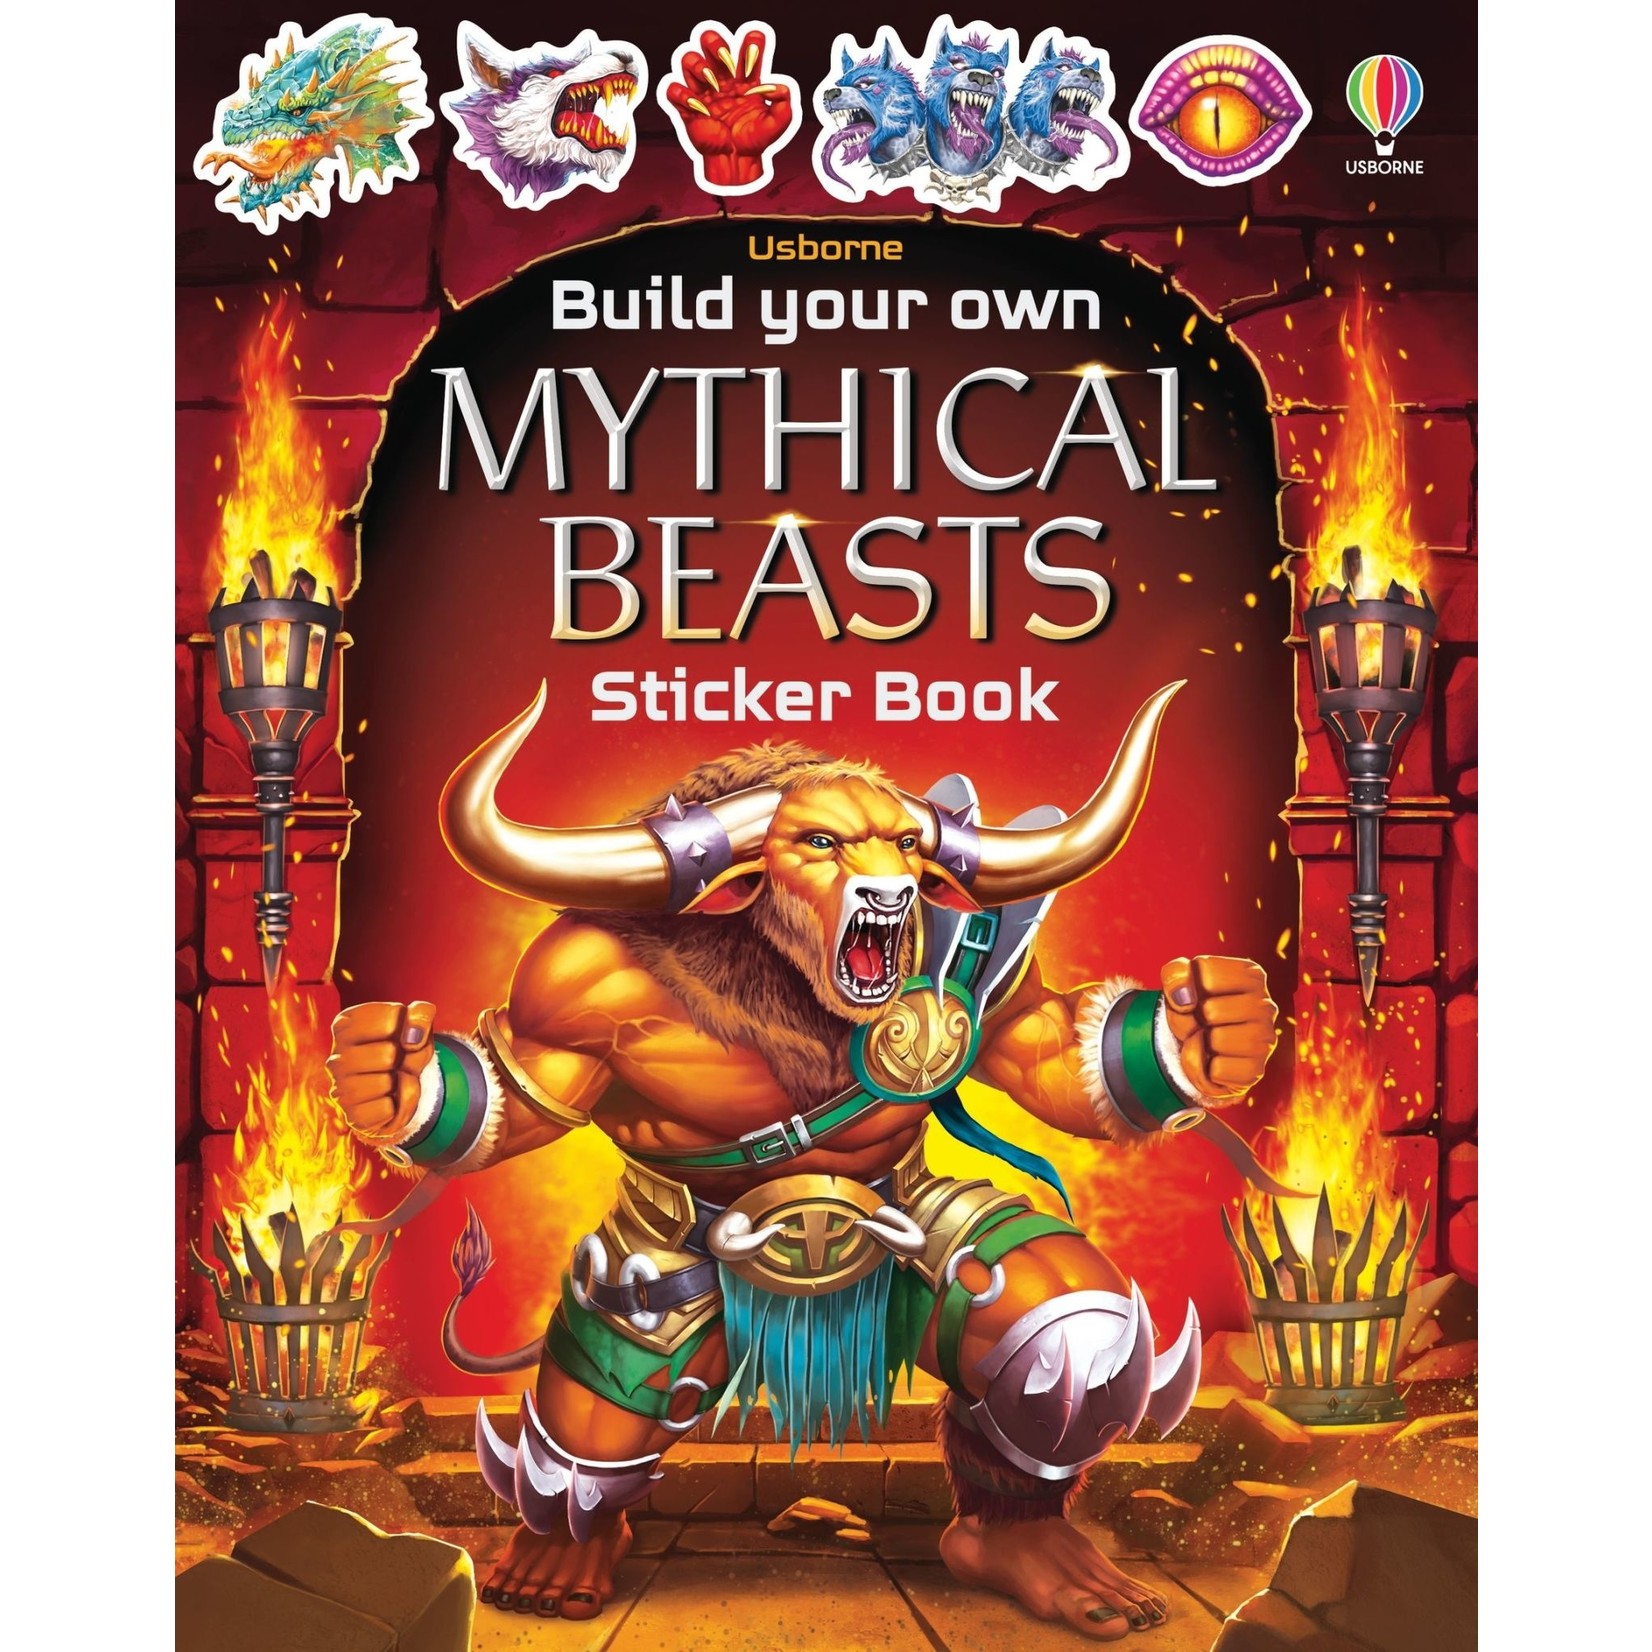 Build your own Mythical Beasts Sticker Book